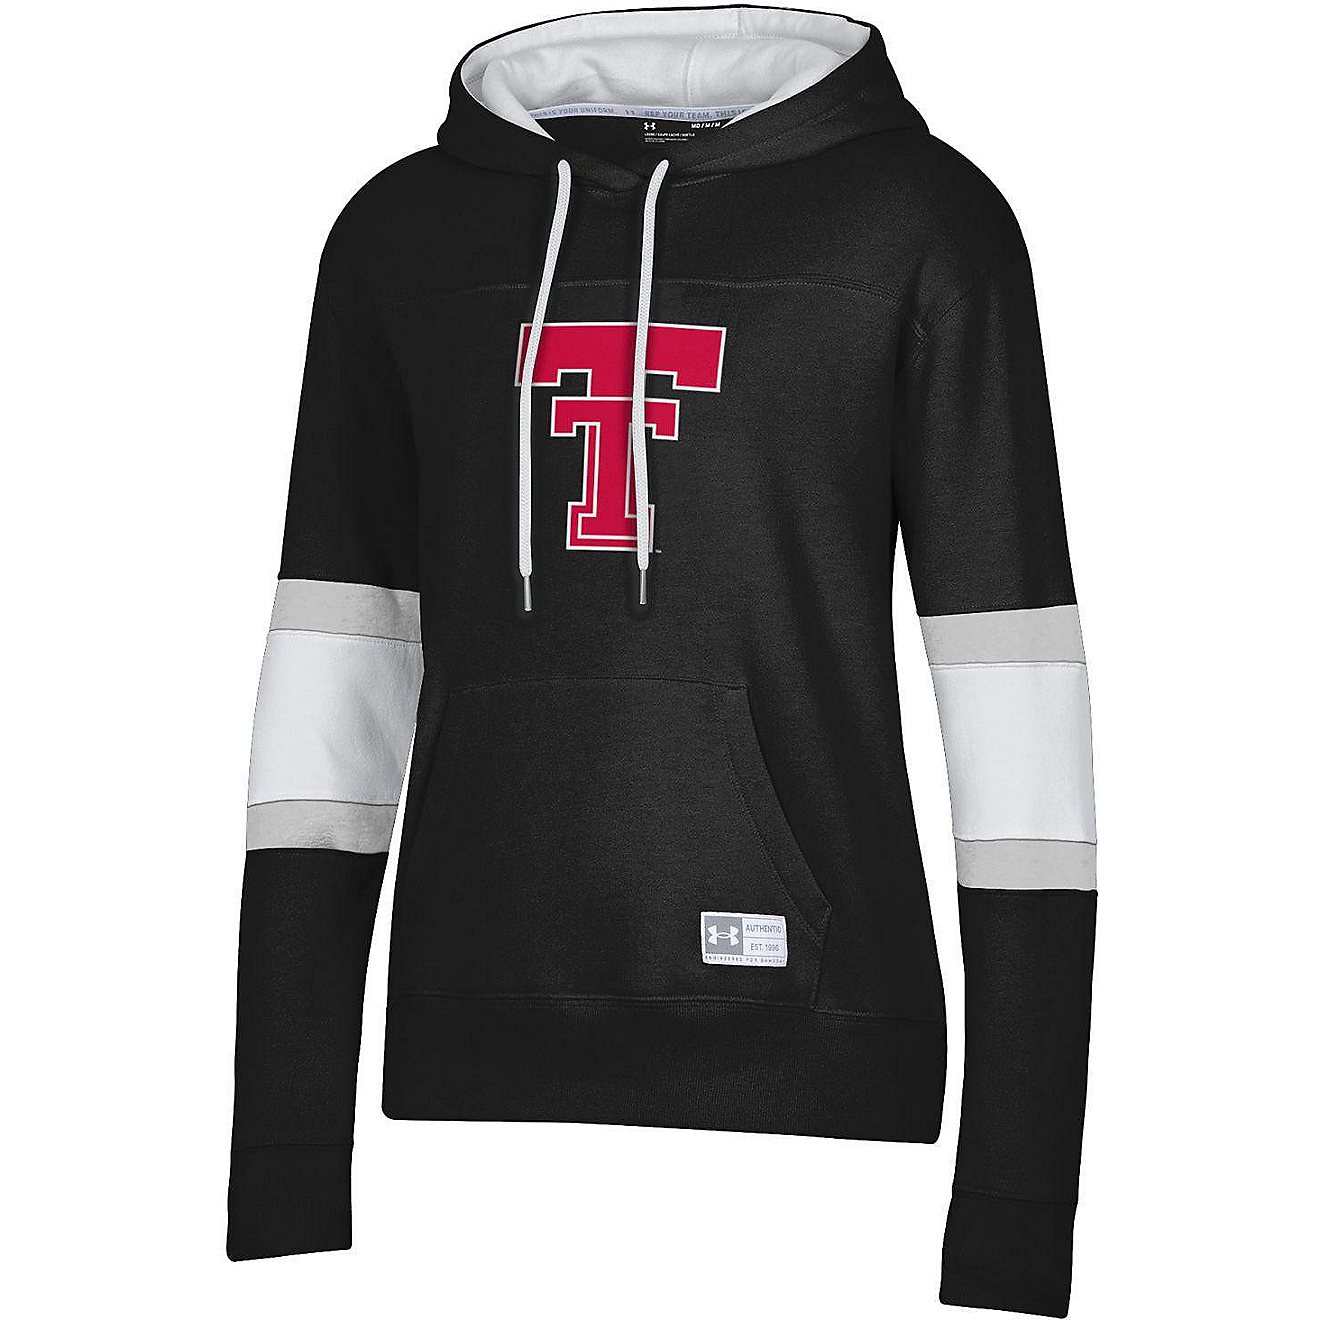 Under Armour Men's Texas Tech University Gameday Thermal Hoodie                                                                  - view number 1